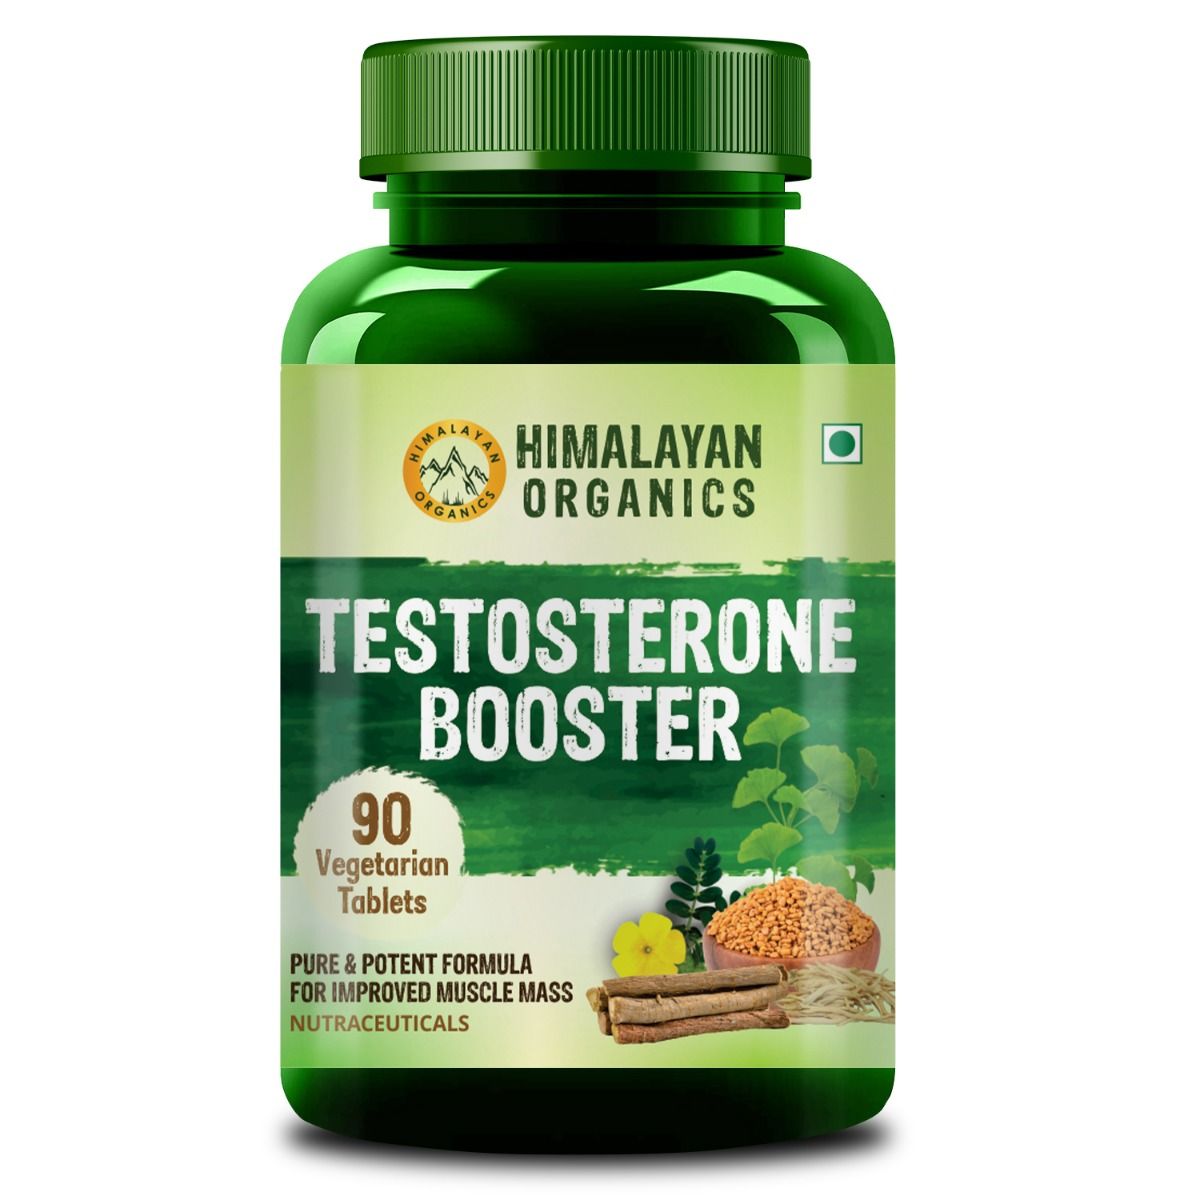 Buy Himalayan Organics Testosterone Booster, 90 Tablets Online